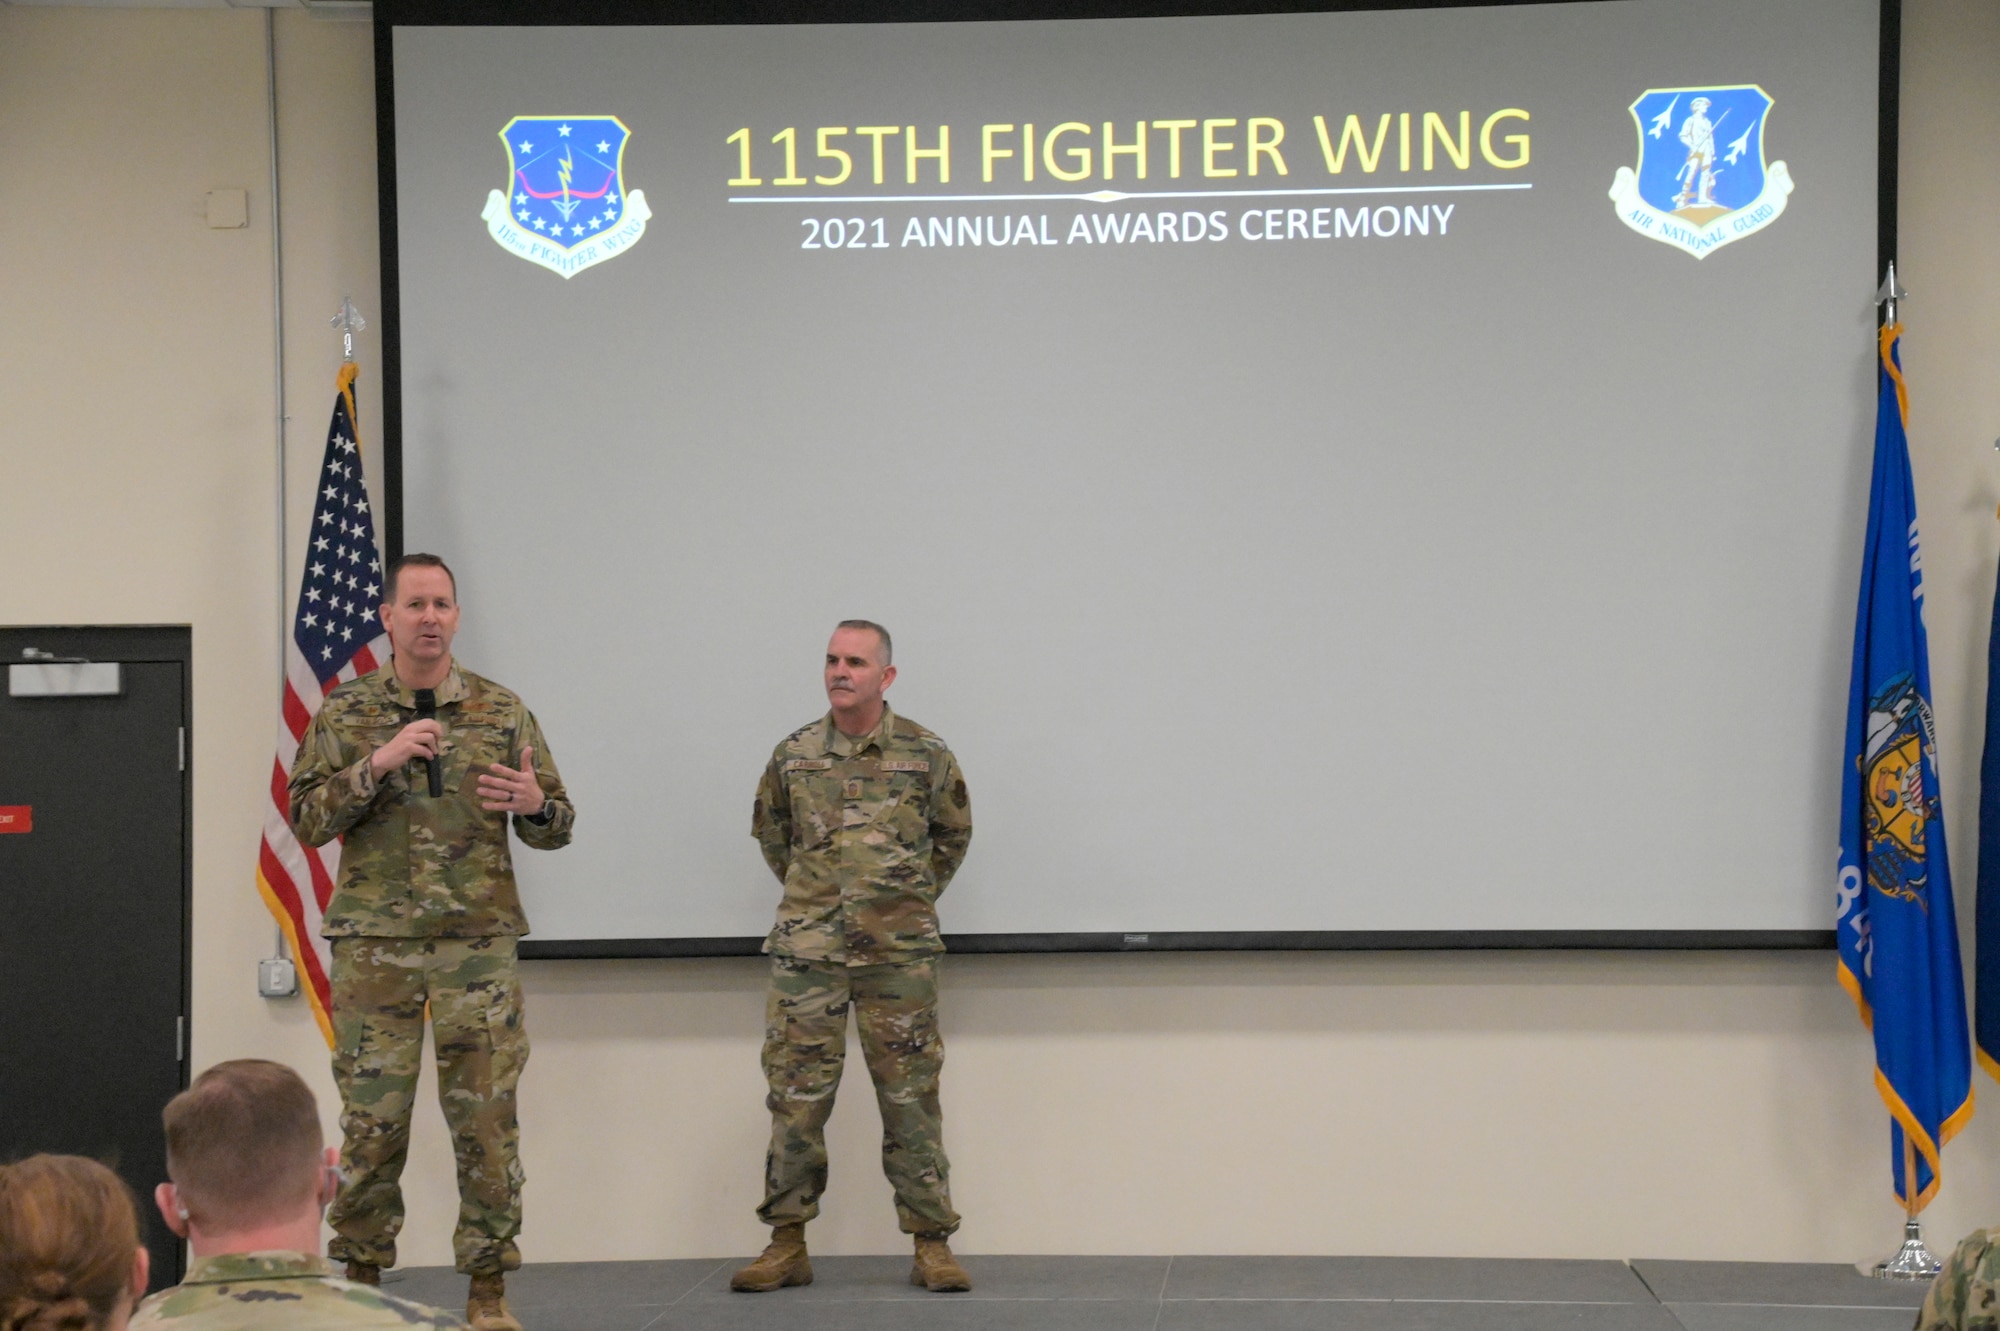 U.S. Air Force Col. Bart Van Roo, 115th Fighter Wing commander, and Chief Master Sgt. Brian Carroll, 115th FW command chief, provide opening statements during the annual awards ceremony at Truax Field, Madison, Wisconsin Feb. 5, 2022. The 115th Fighter Wing holds an annual awards ceremony to recognize the achievements of unit members.